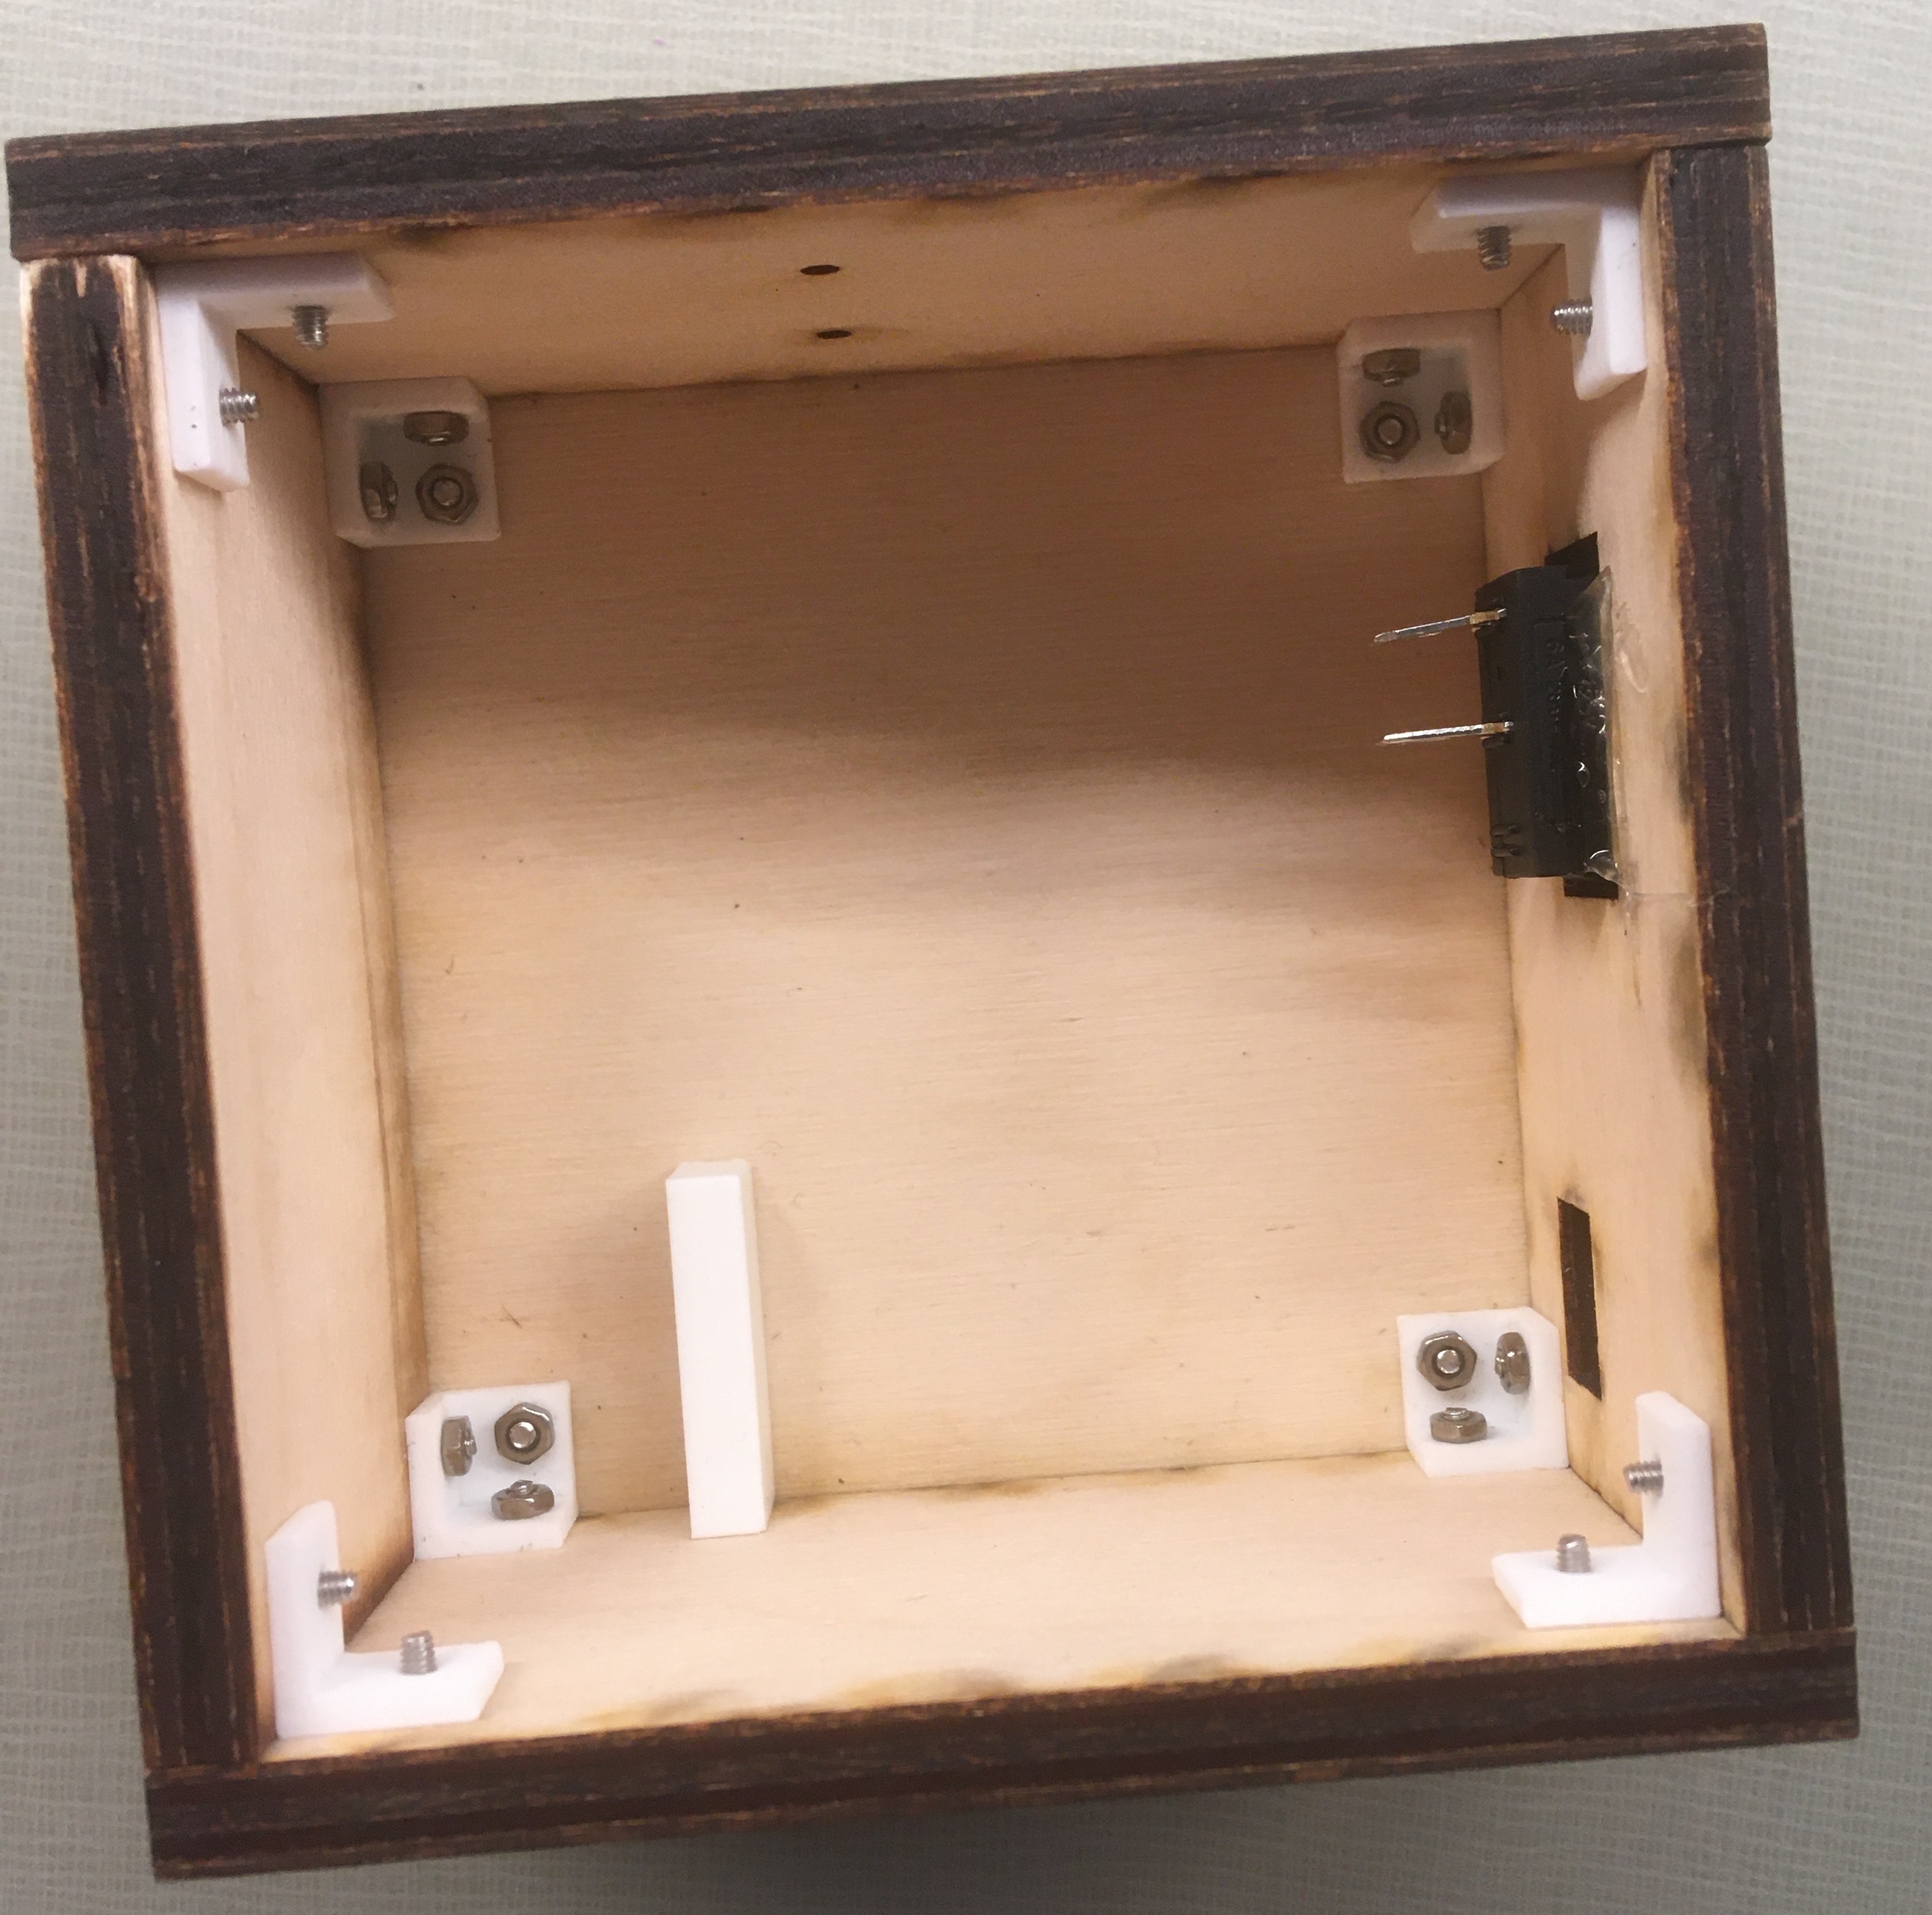 Assembled Box Without Top